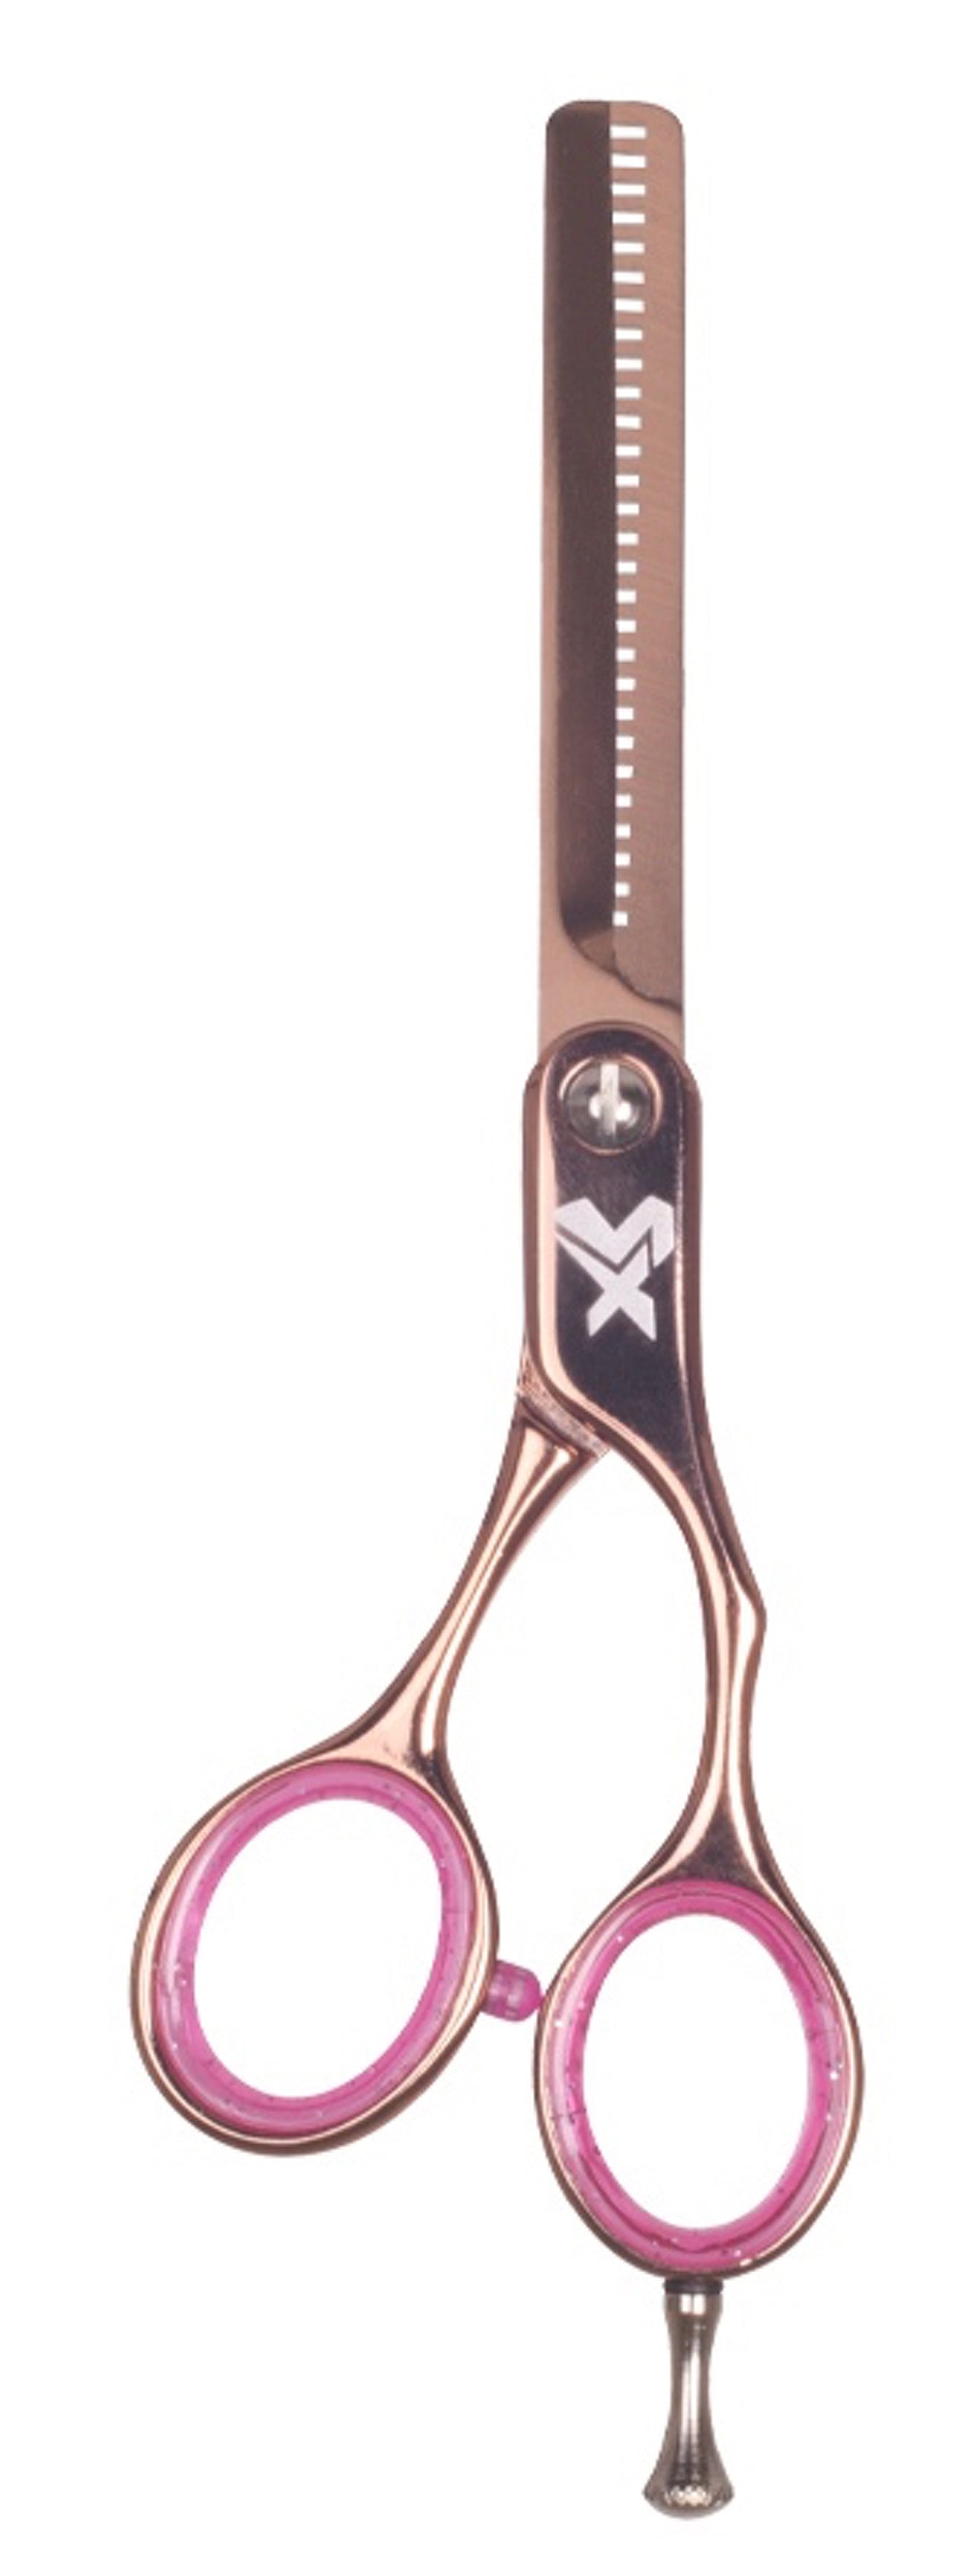 Cricket Shear Xpressions Hey Rosie 30T Thinner. Thinning Shears